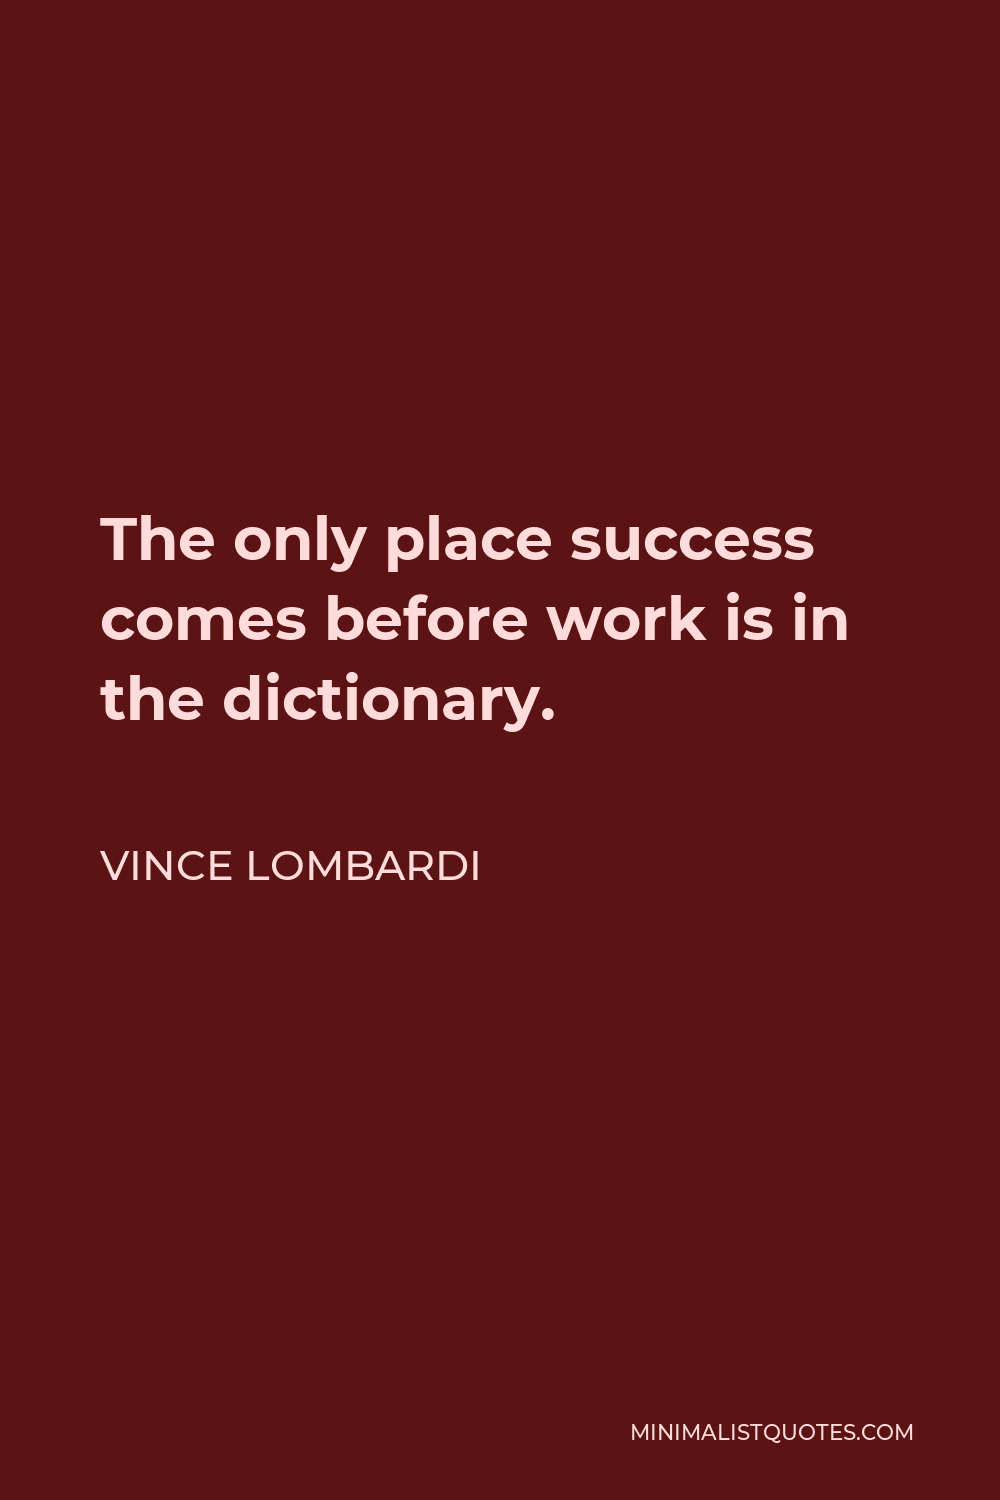 Vince Lombardi Quote - The only place success comes before work is in the dictionary.